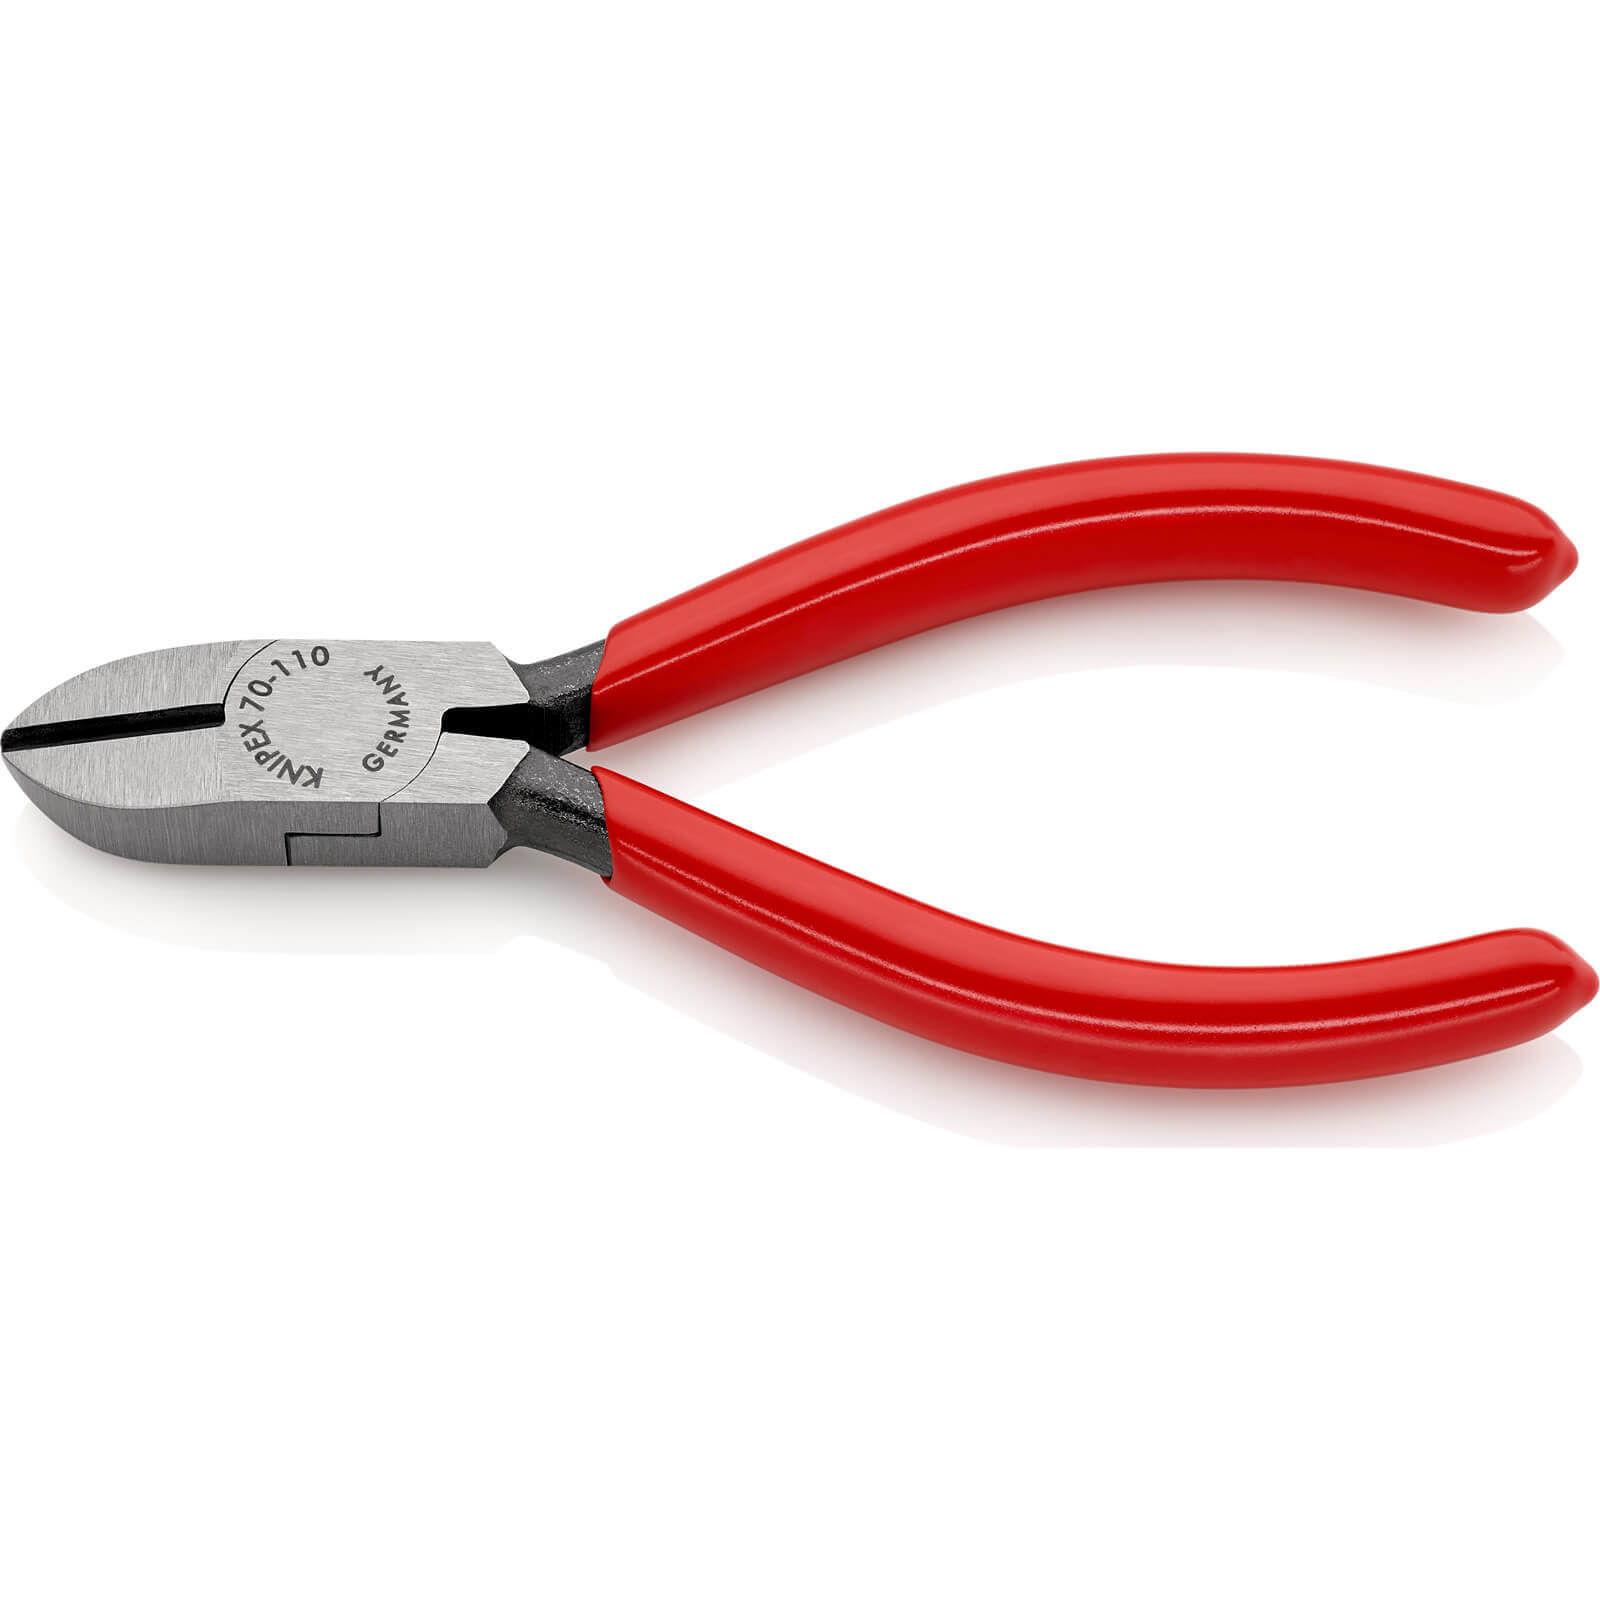 Image of Knipex 70 01 Diagonal Cutting Pliers 110mm